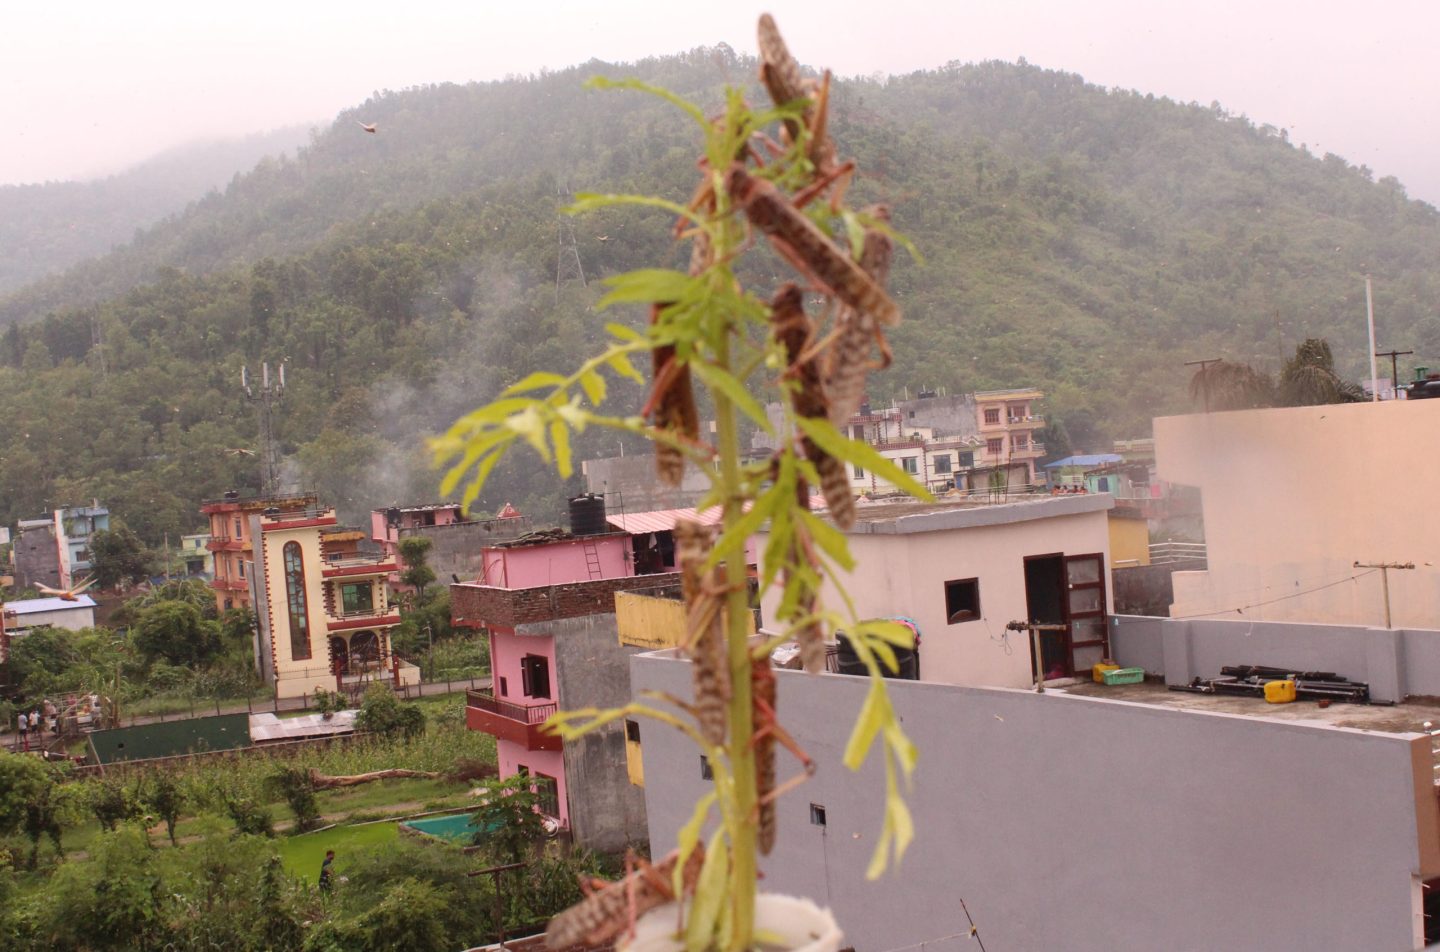 Locusts spotted in Kathmandu Valley as well